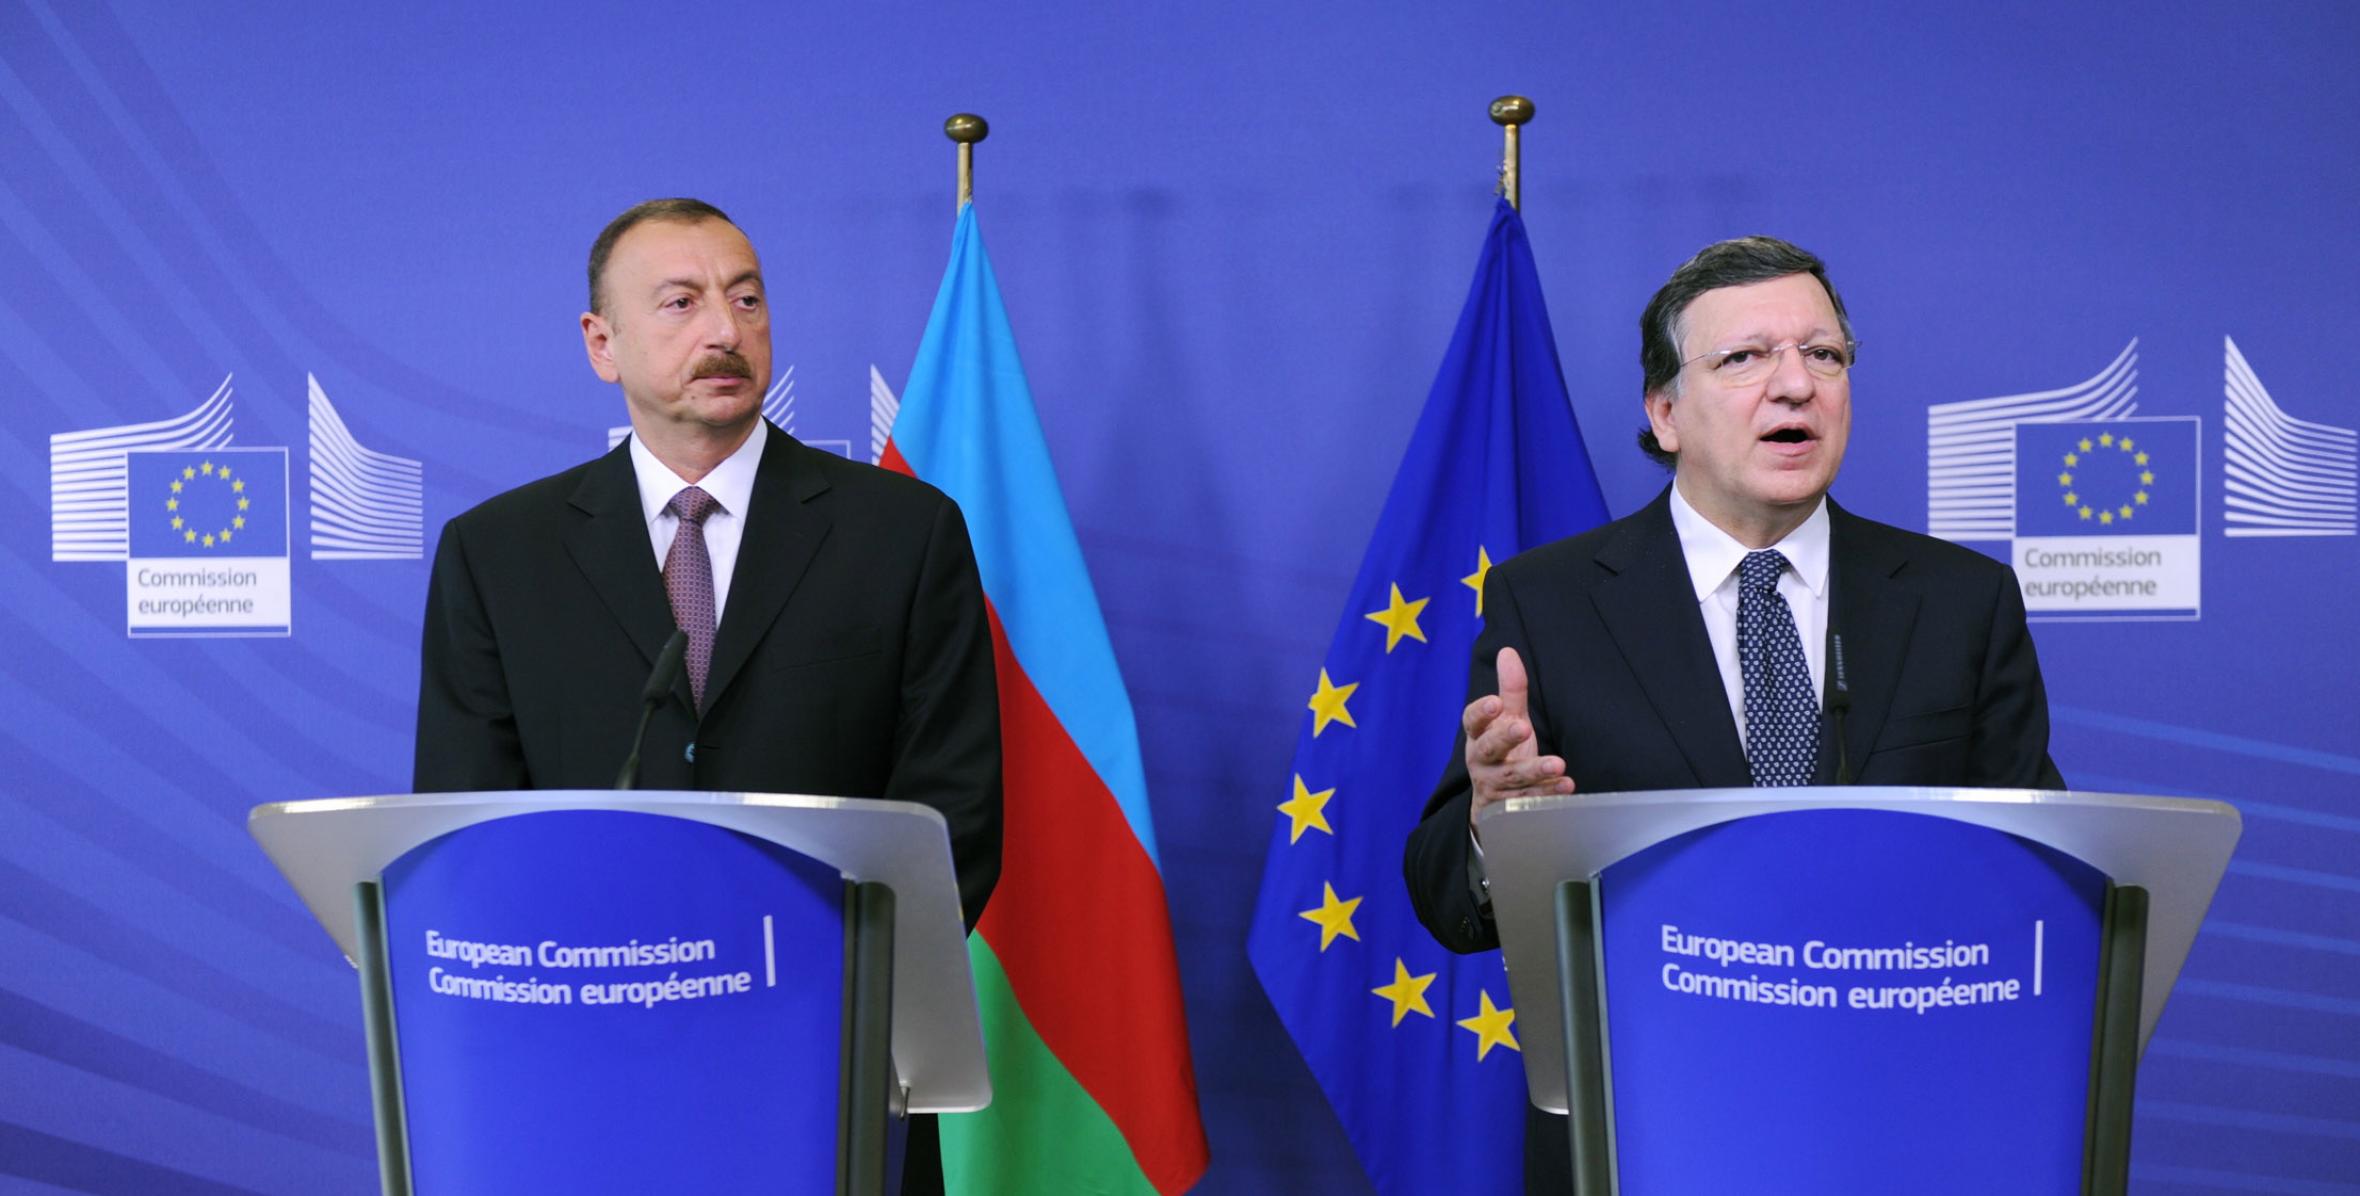 Ilham Aliyev and European Commission President Jose Manuel Barroso held a joint press conference